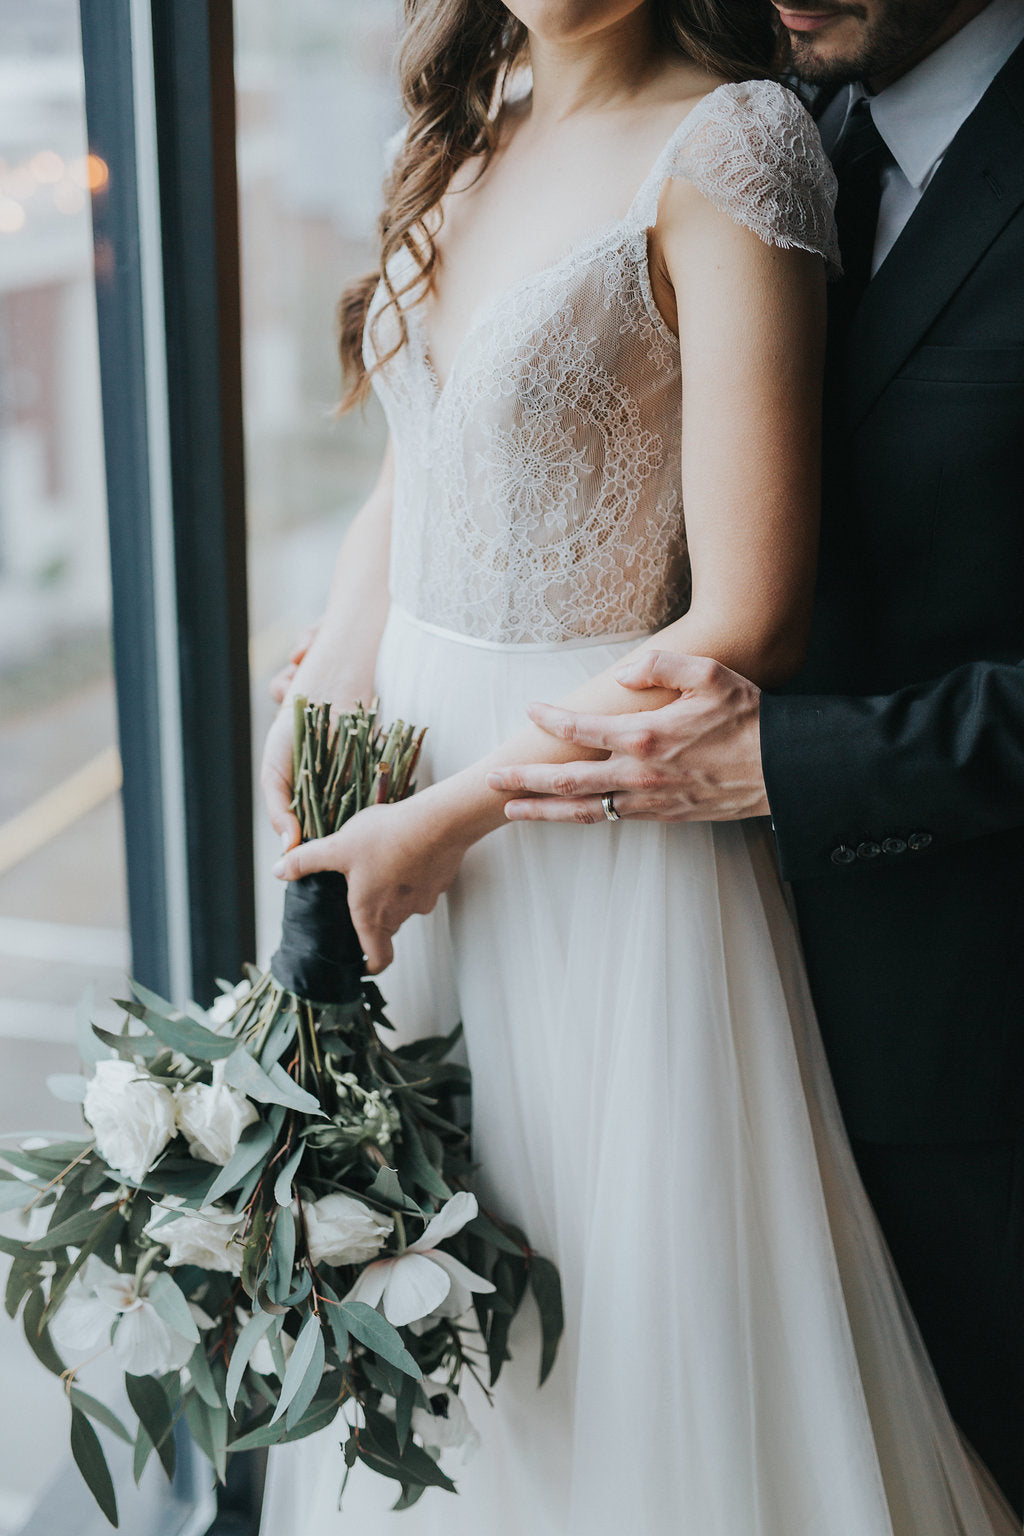 wedding dress shopping tips and advice